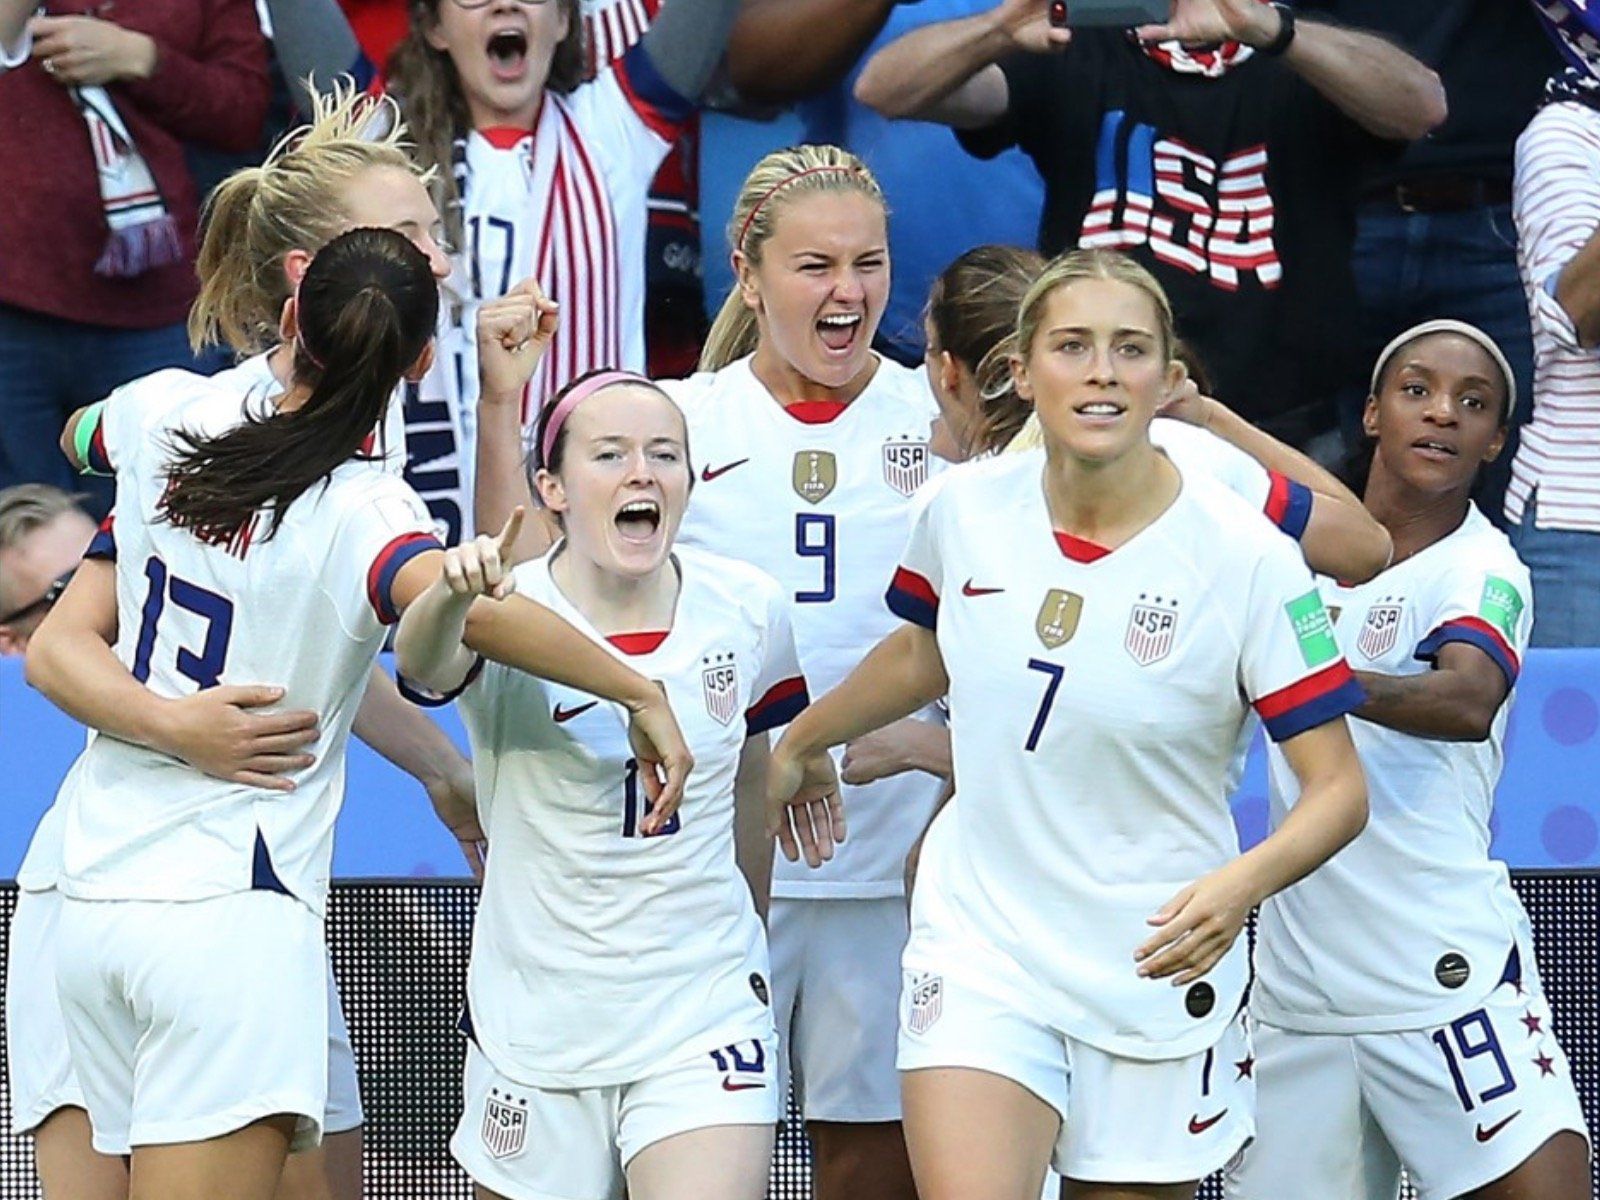 places to cheer on the U.S. women's soccer team in the World